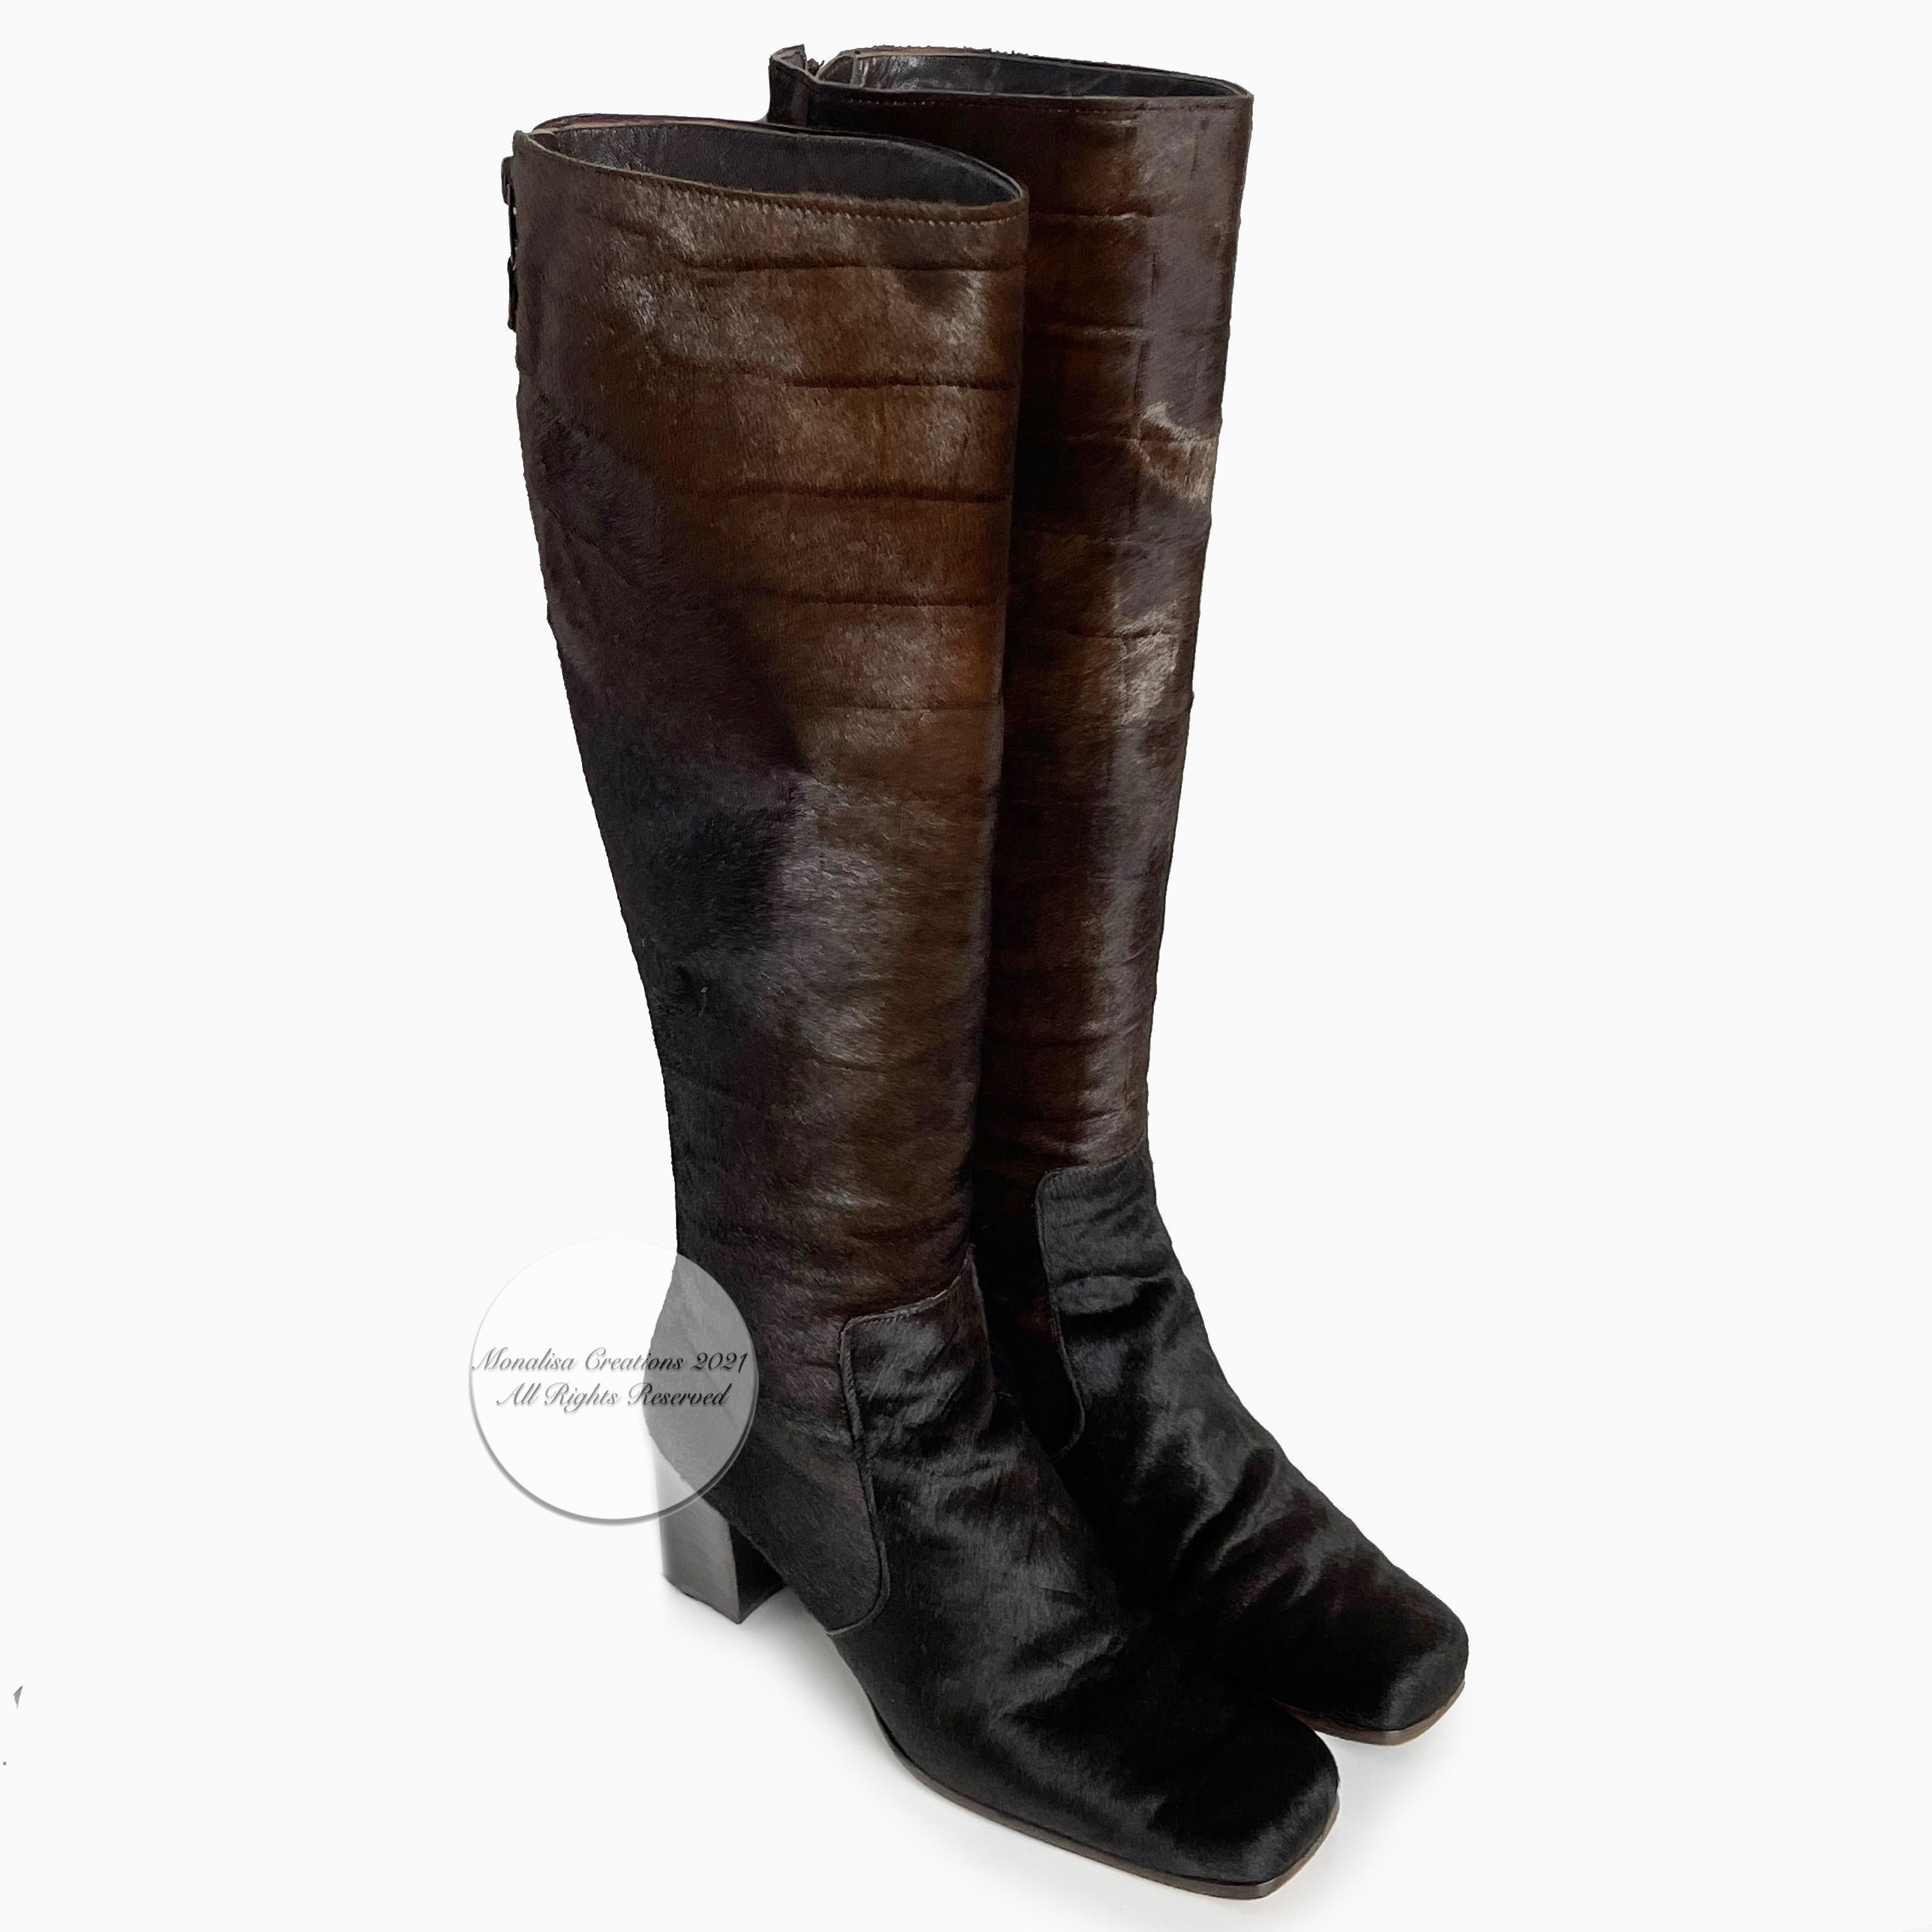 Yves Saint Laurent knee high boots in a rich brown croc-textured pony, made in Italy, most likely in the 70s.  Rear zipper entry, square toe and heels.   Iconic style, the texturing on the brown pony is fabulous (see image 7 where we've purposely